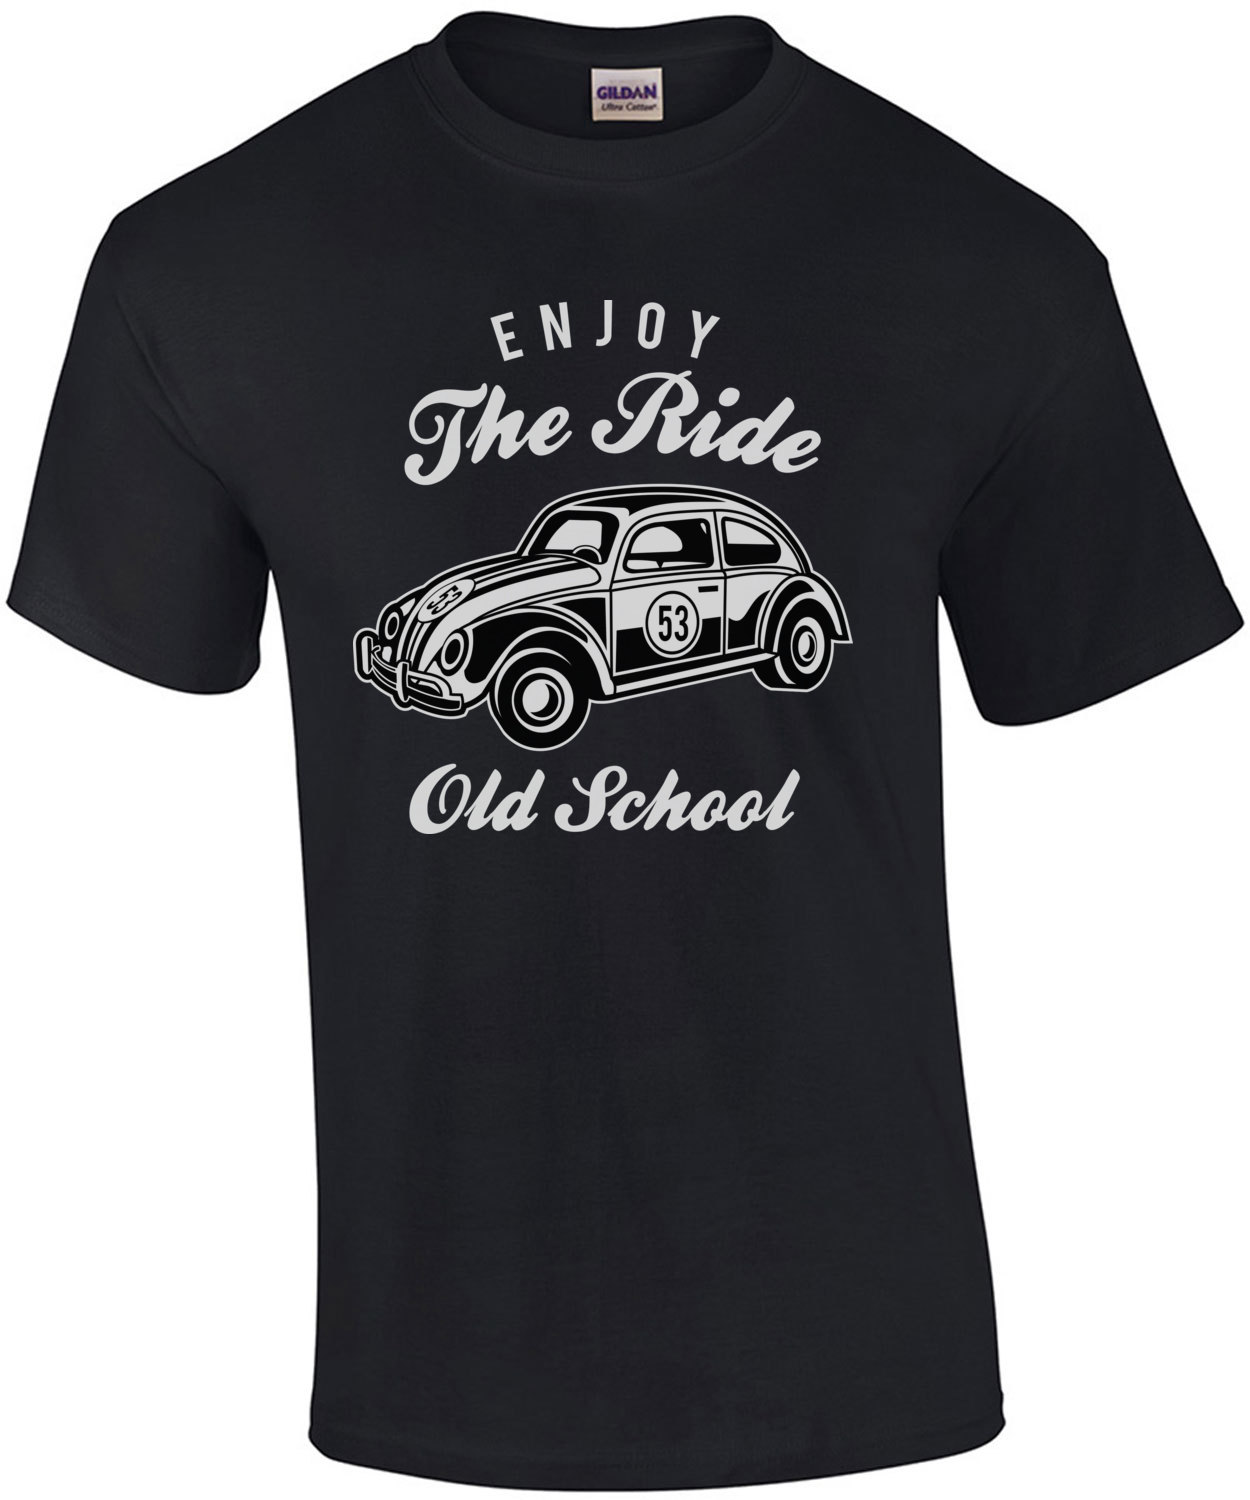 THIS IS MY RIDE T Shirt OLD SCHOOL BEETLE ENJOY THE RIDE S-3XL